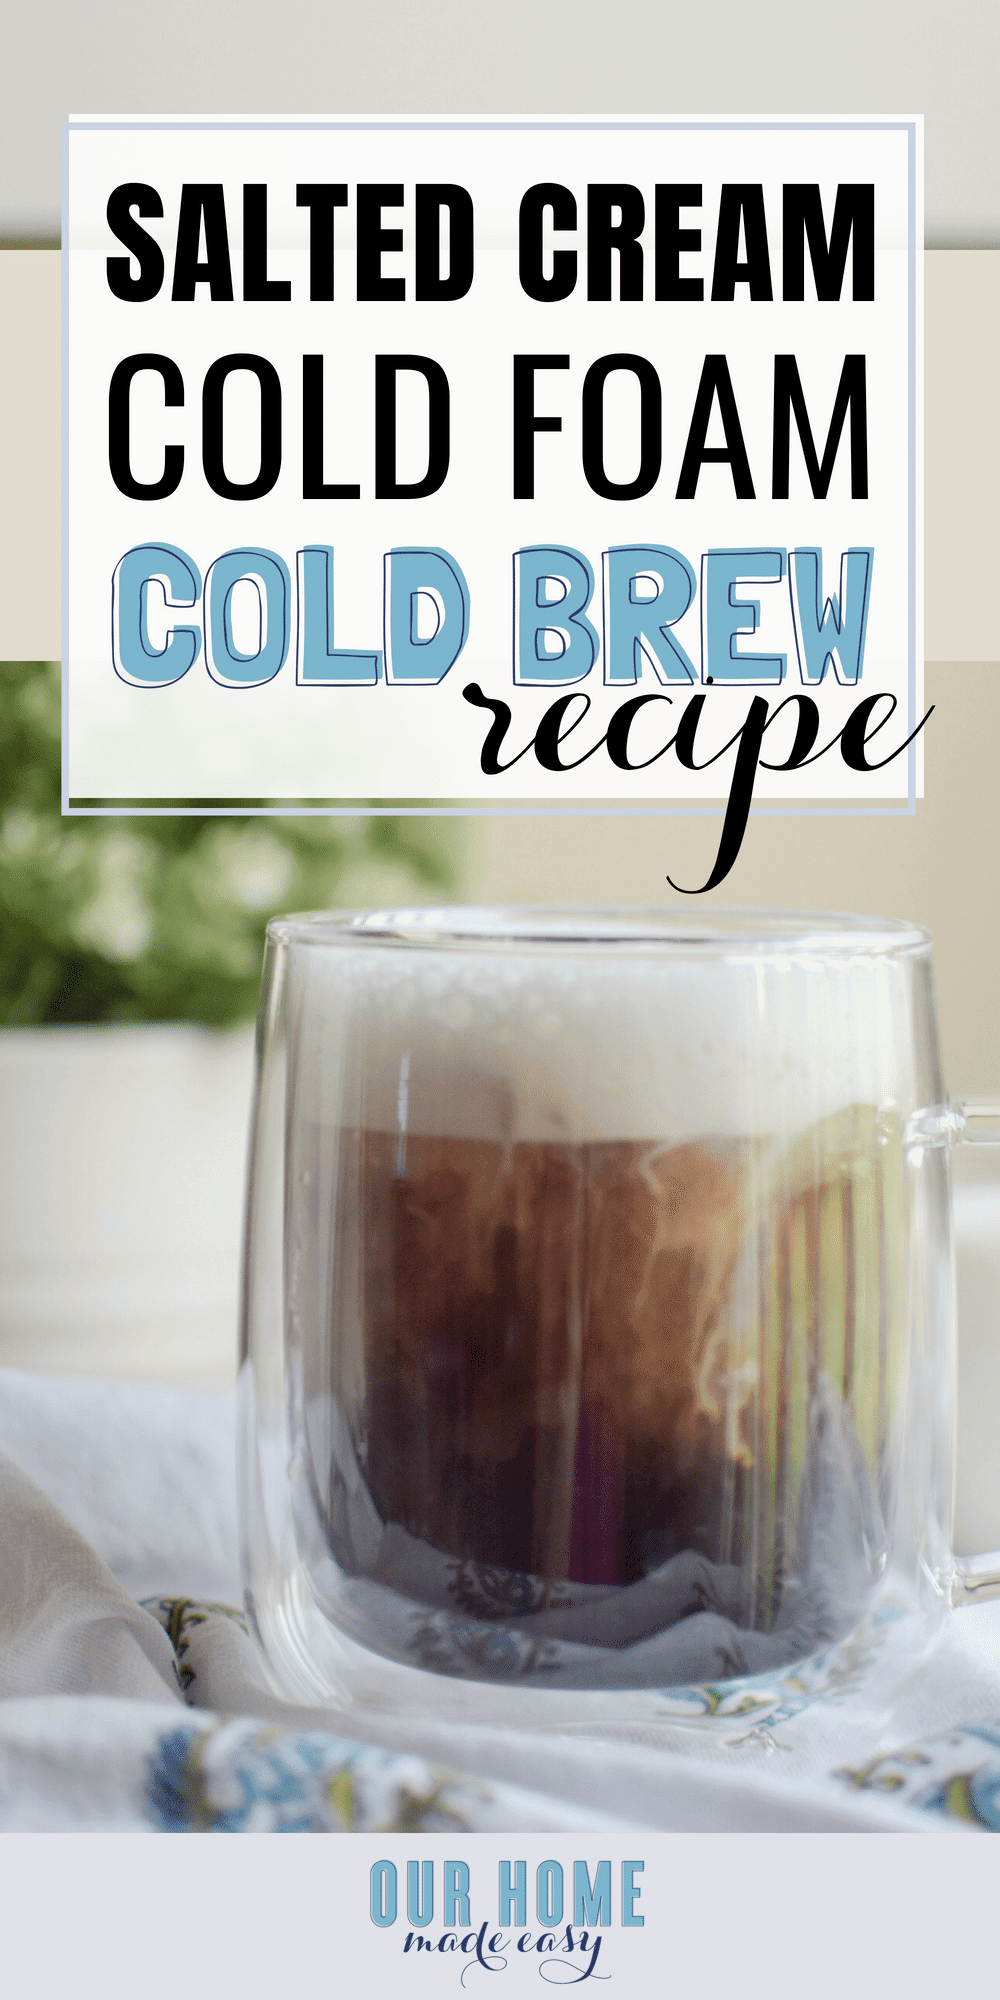 Love the new Salted Cream Cold Foam Cold Brew? Make it home really easily with this copycat recipe! Save money & pour in all the cold foam you want! #starbucks #coffee #coldbrew #caffeine #recipe